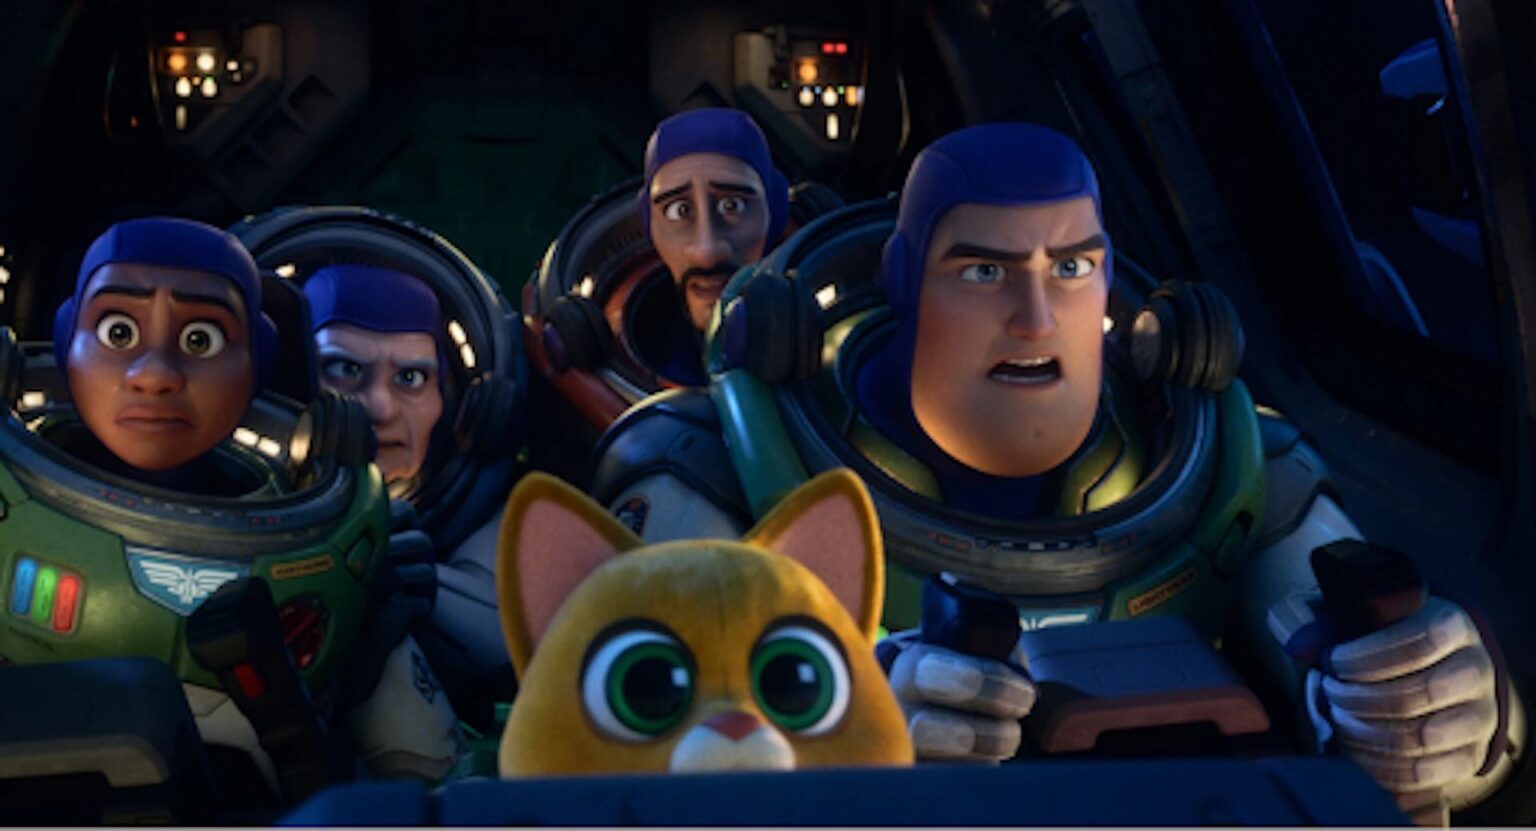 Does 'Lightyear' have a release date on a streaming yet? Here's how you can stream Toy Story's iconic space ranger story of Buzz Lightyear online for free.